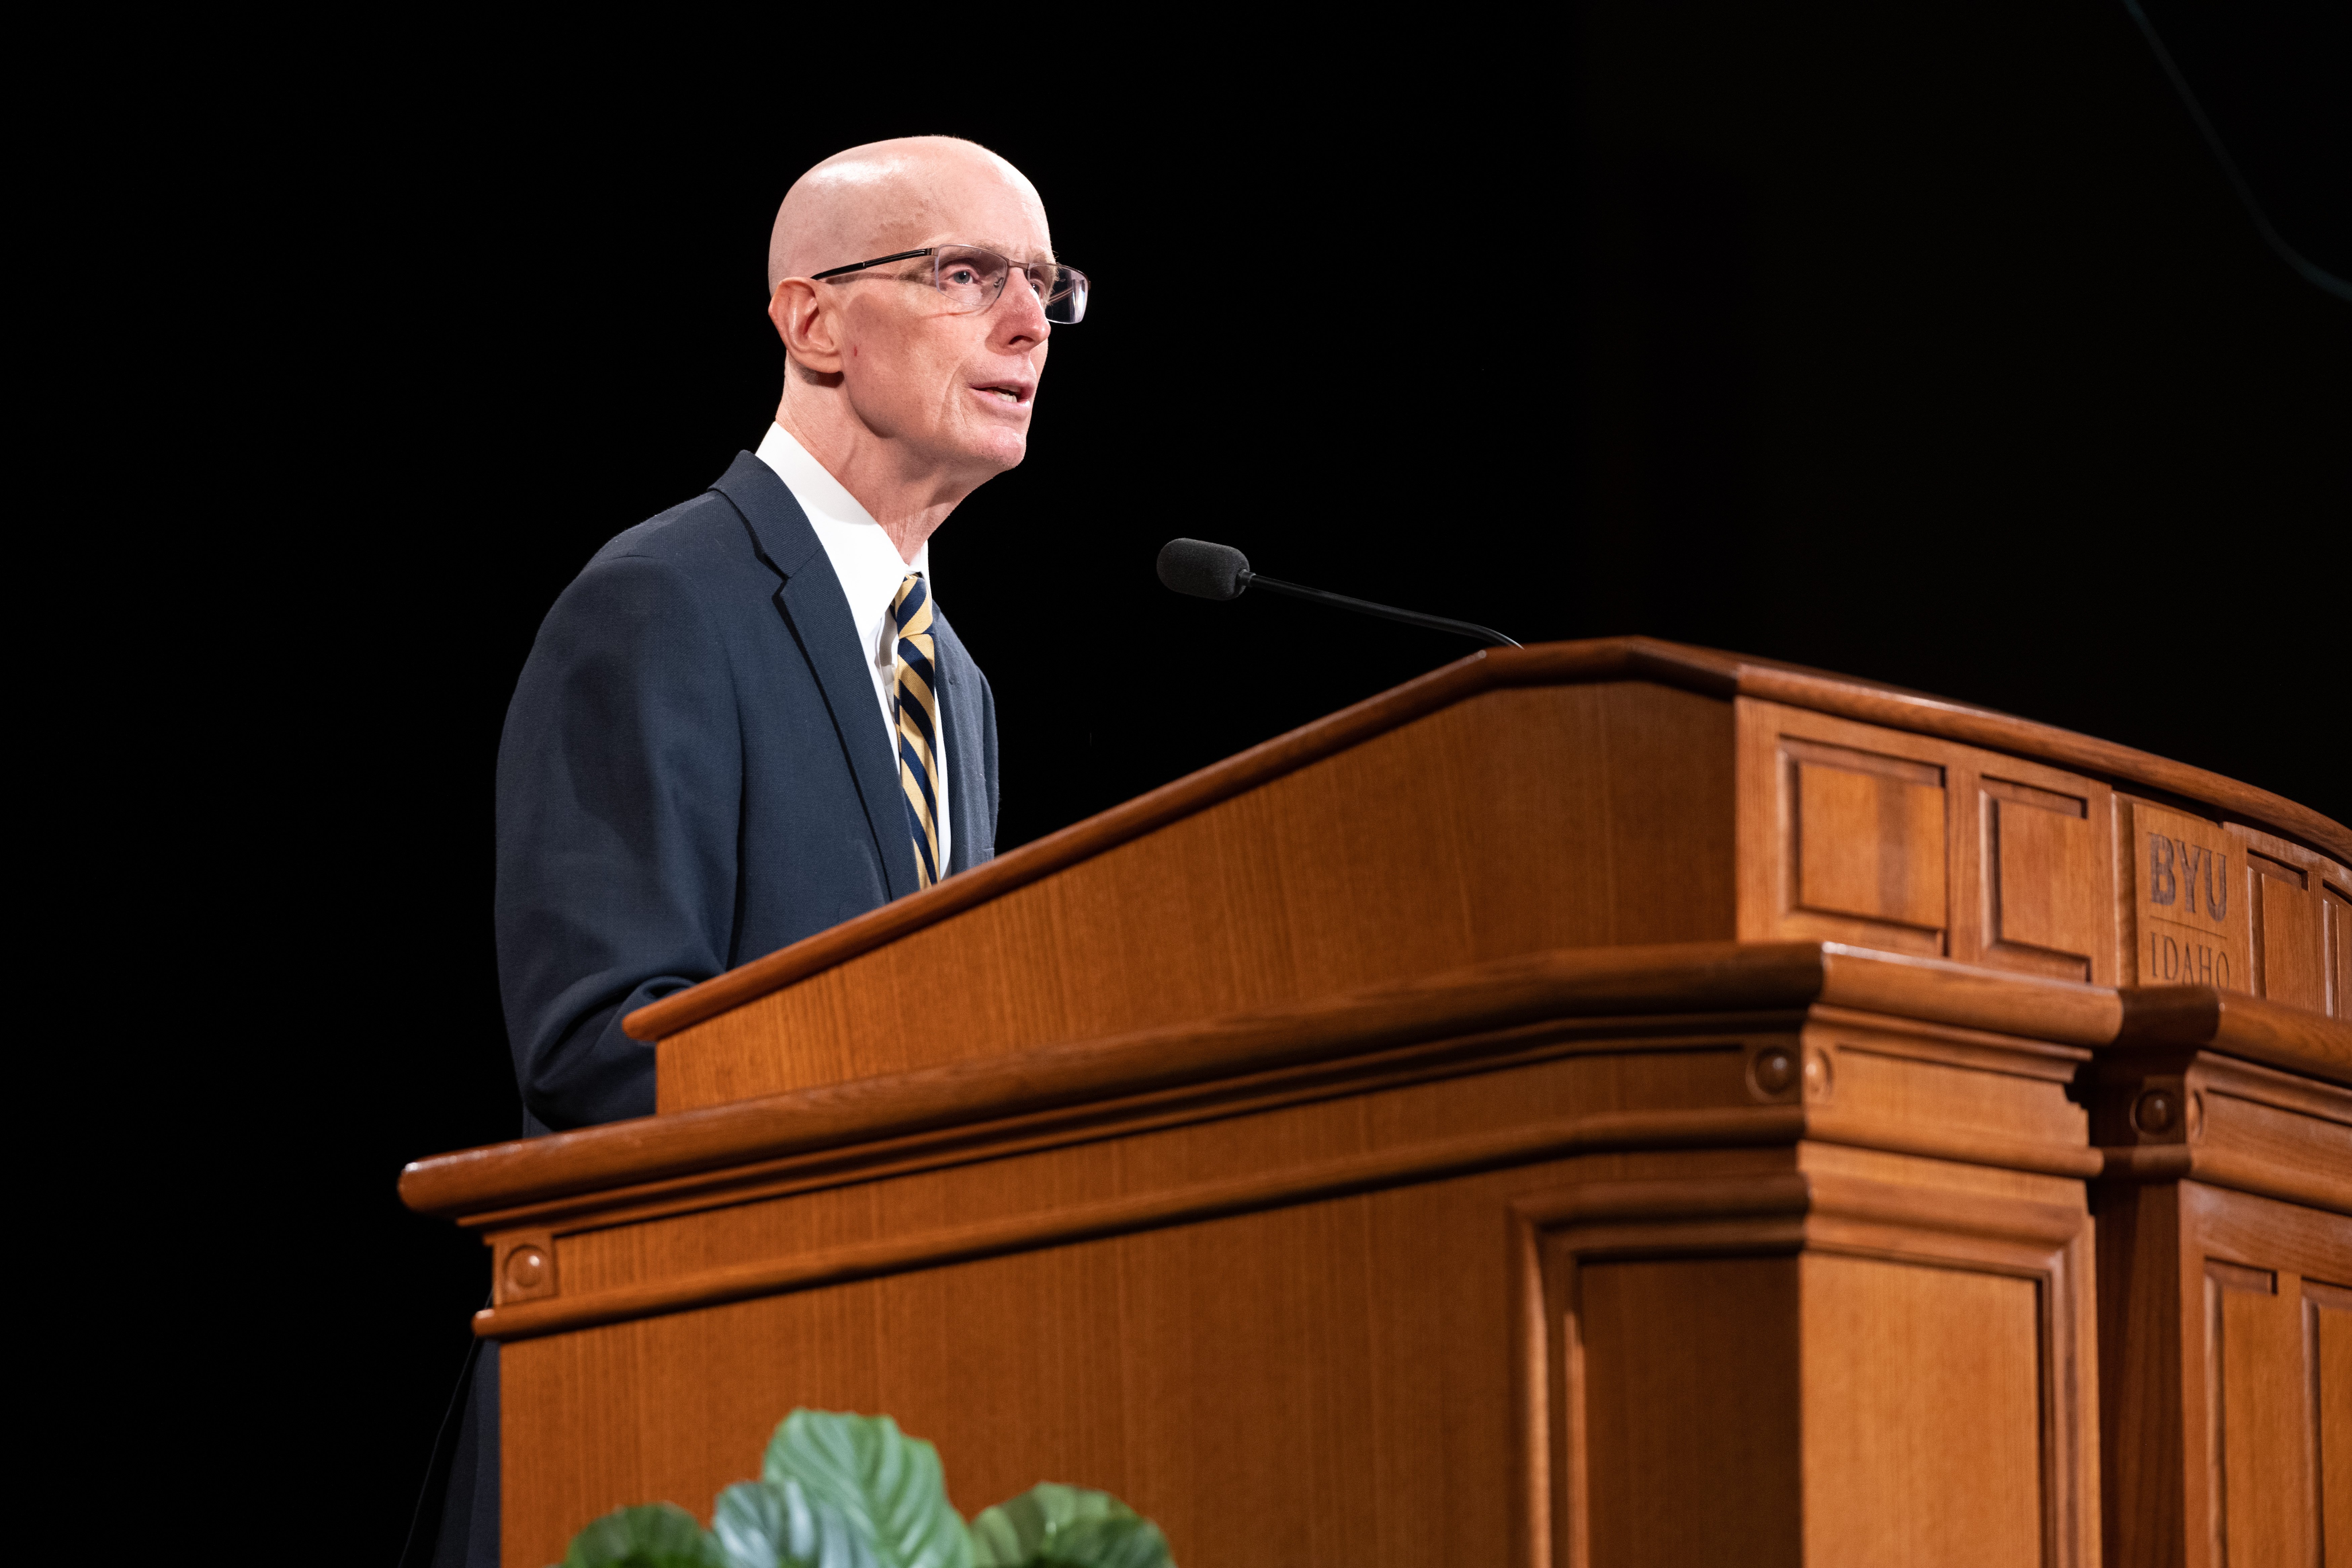 President Eyring speaking at a devotional